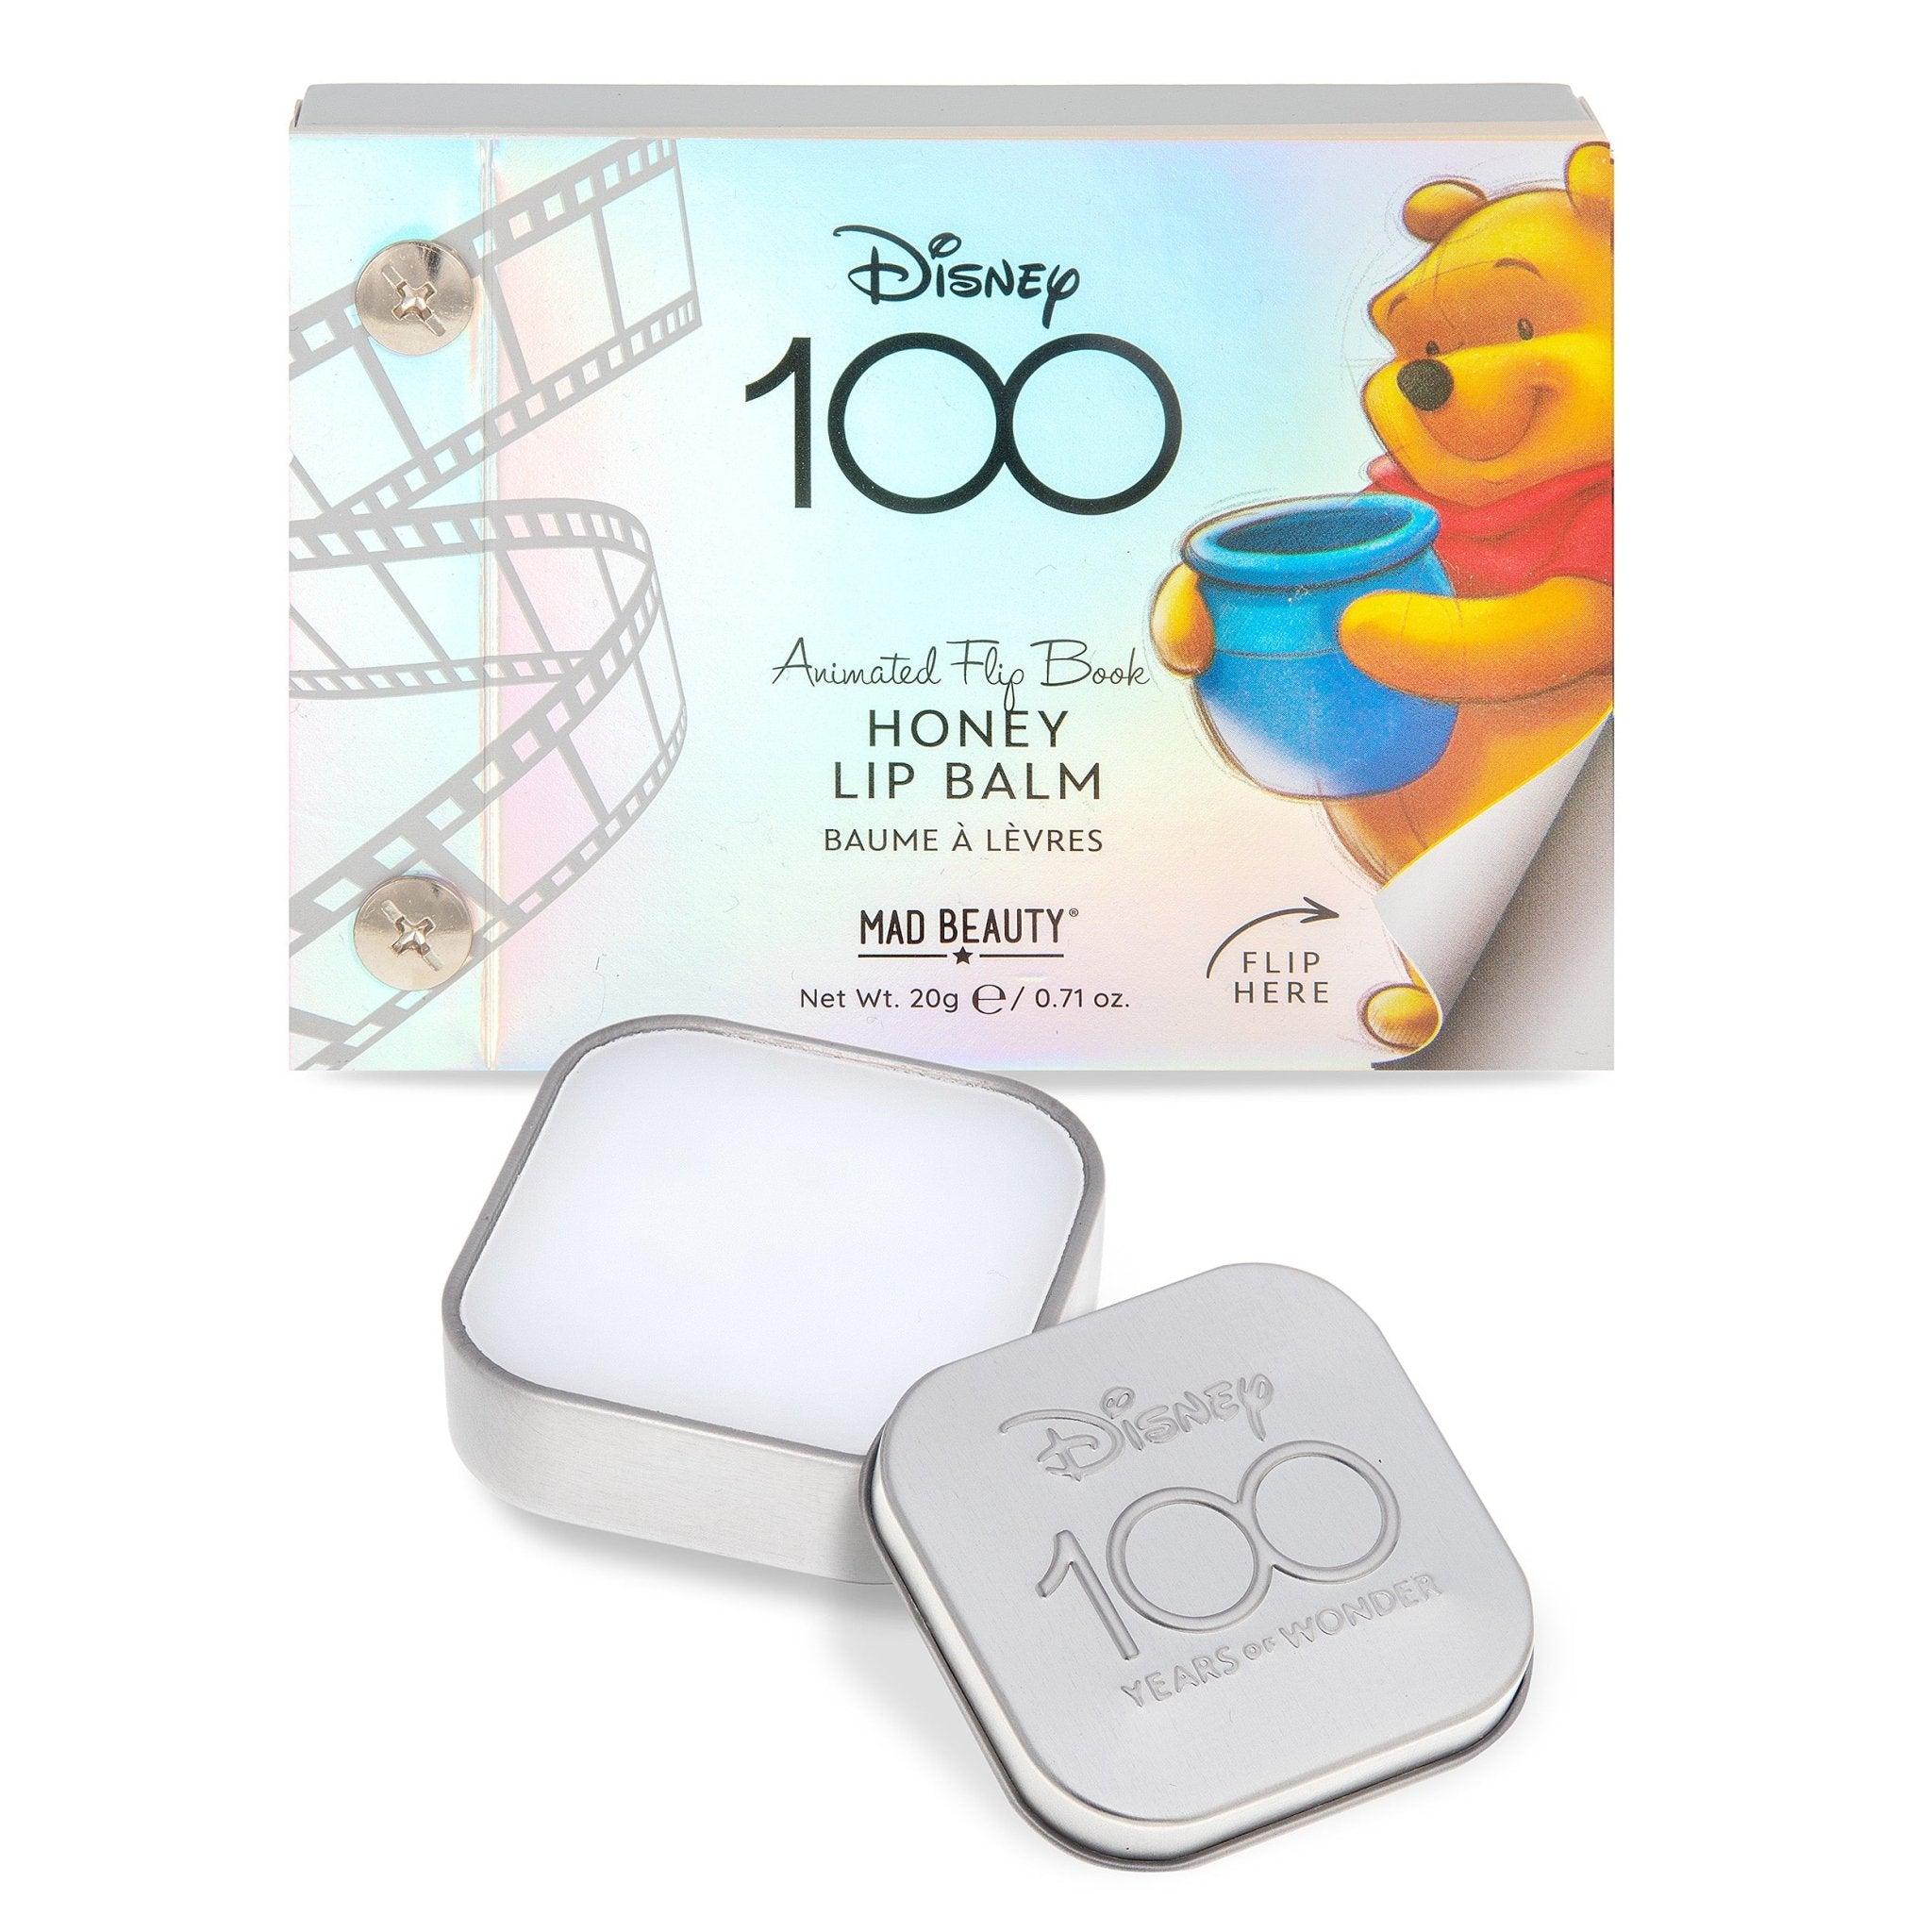 Shop Disney 100 Winnie the Pooh Lip Balm - Premium Lip Balm from Mad Beauty Online now at Spoiled Brat 